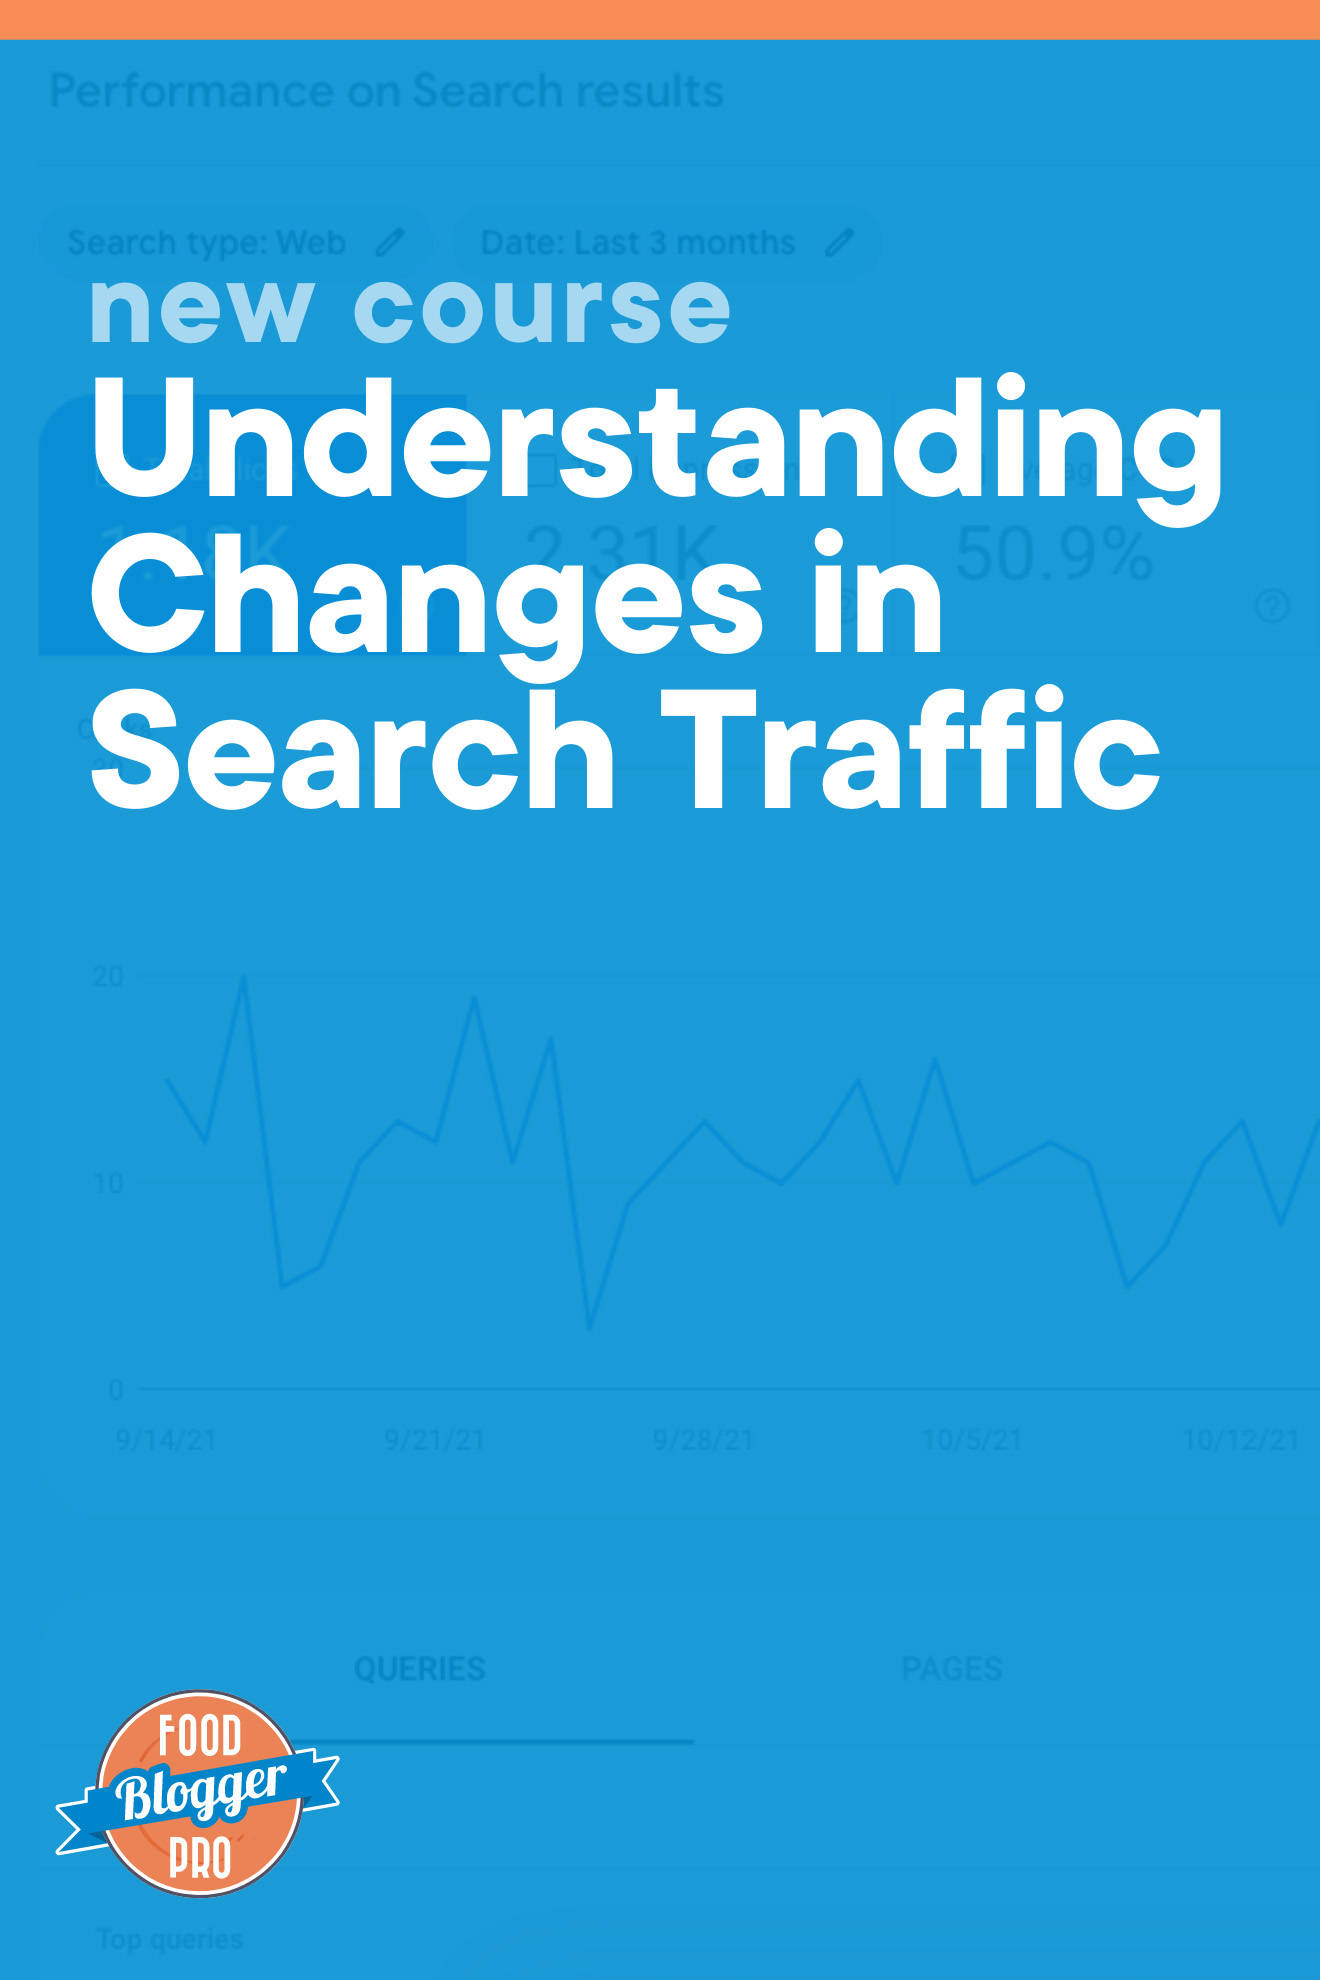 Blue graphic of Google Search Console that reads 'New Course: Understanding Changes in Search Traffic' with Food Blogger Pro logo